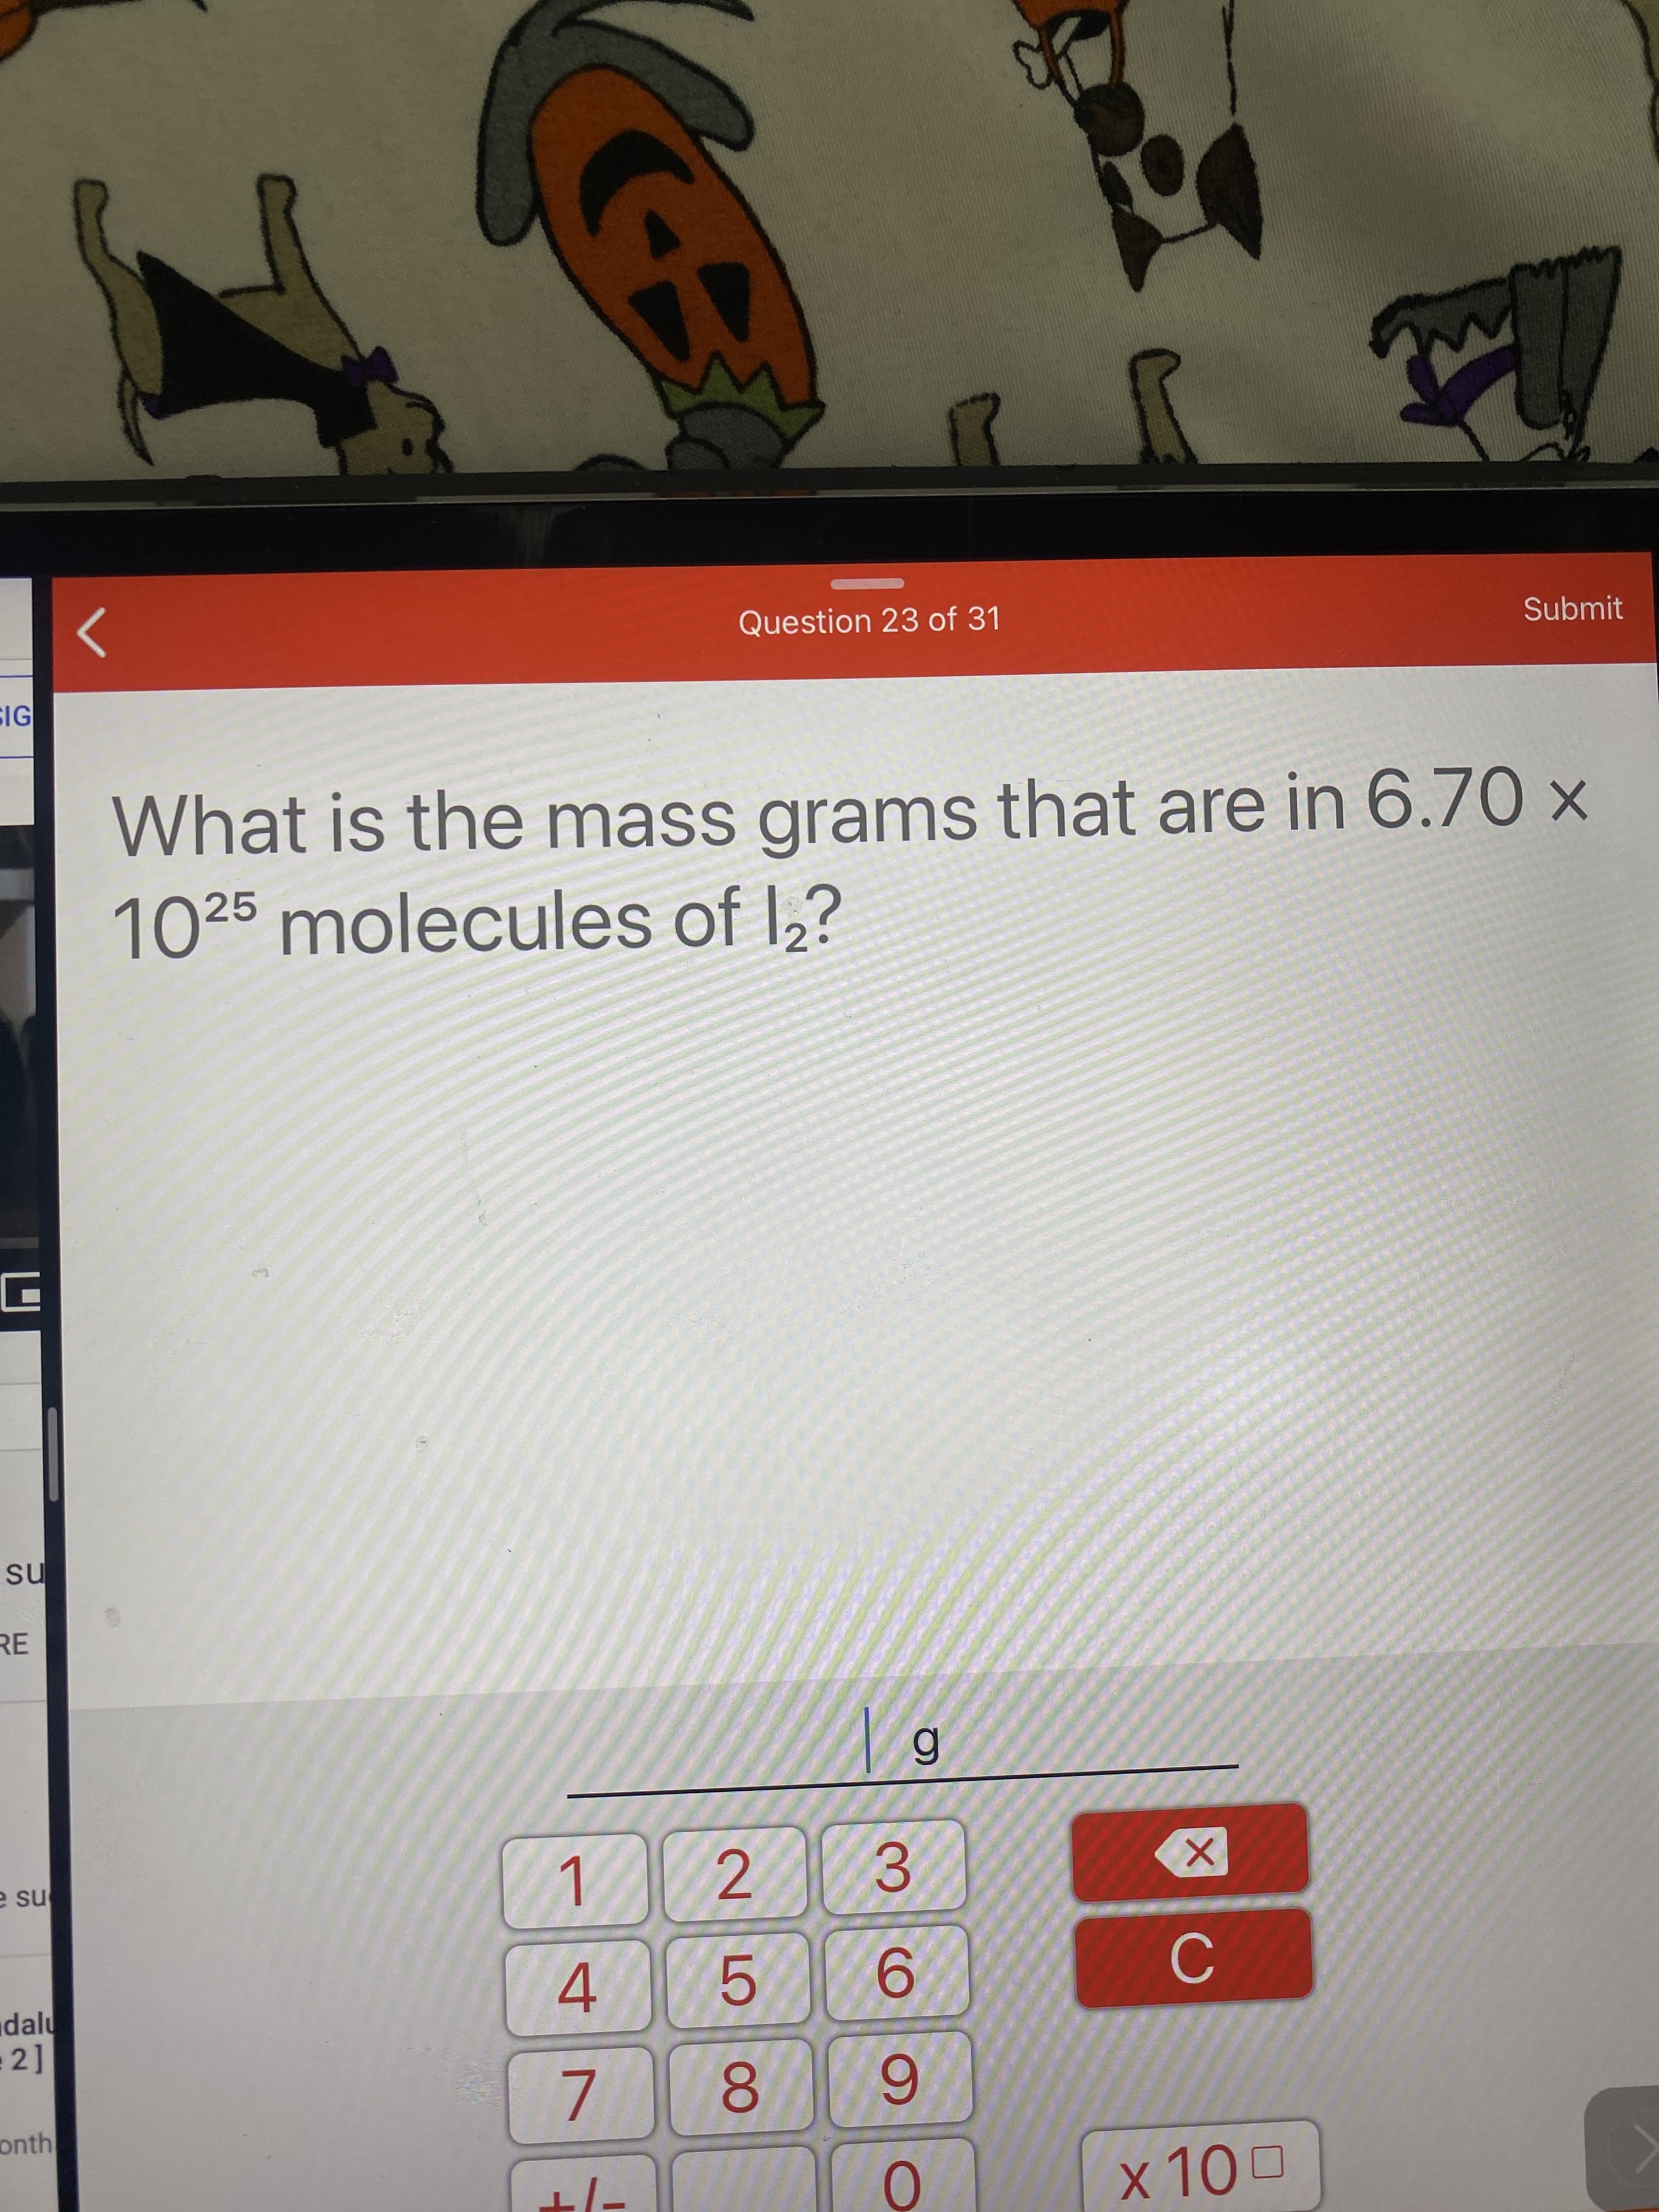 What is the mass grams that are in 6.70 x
1025 molecules of 1,?
